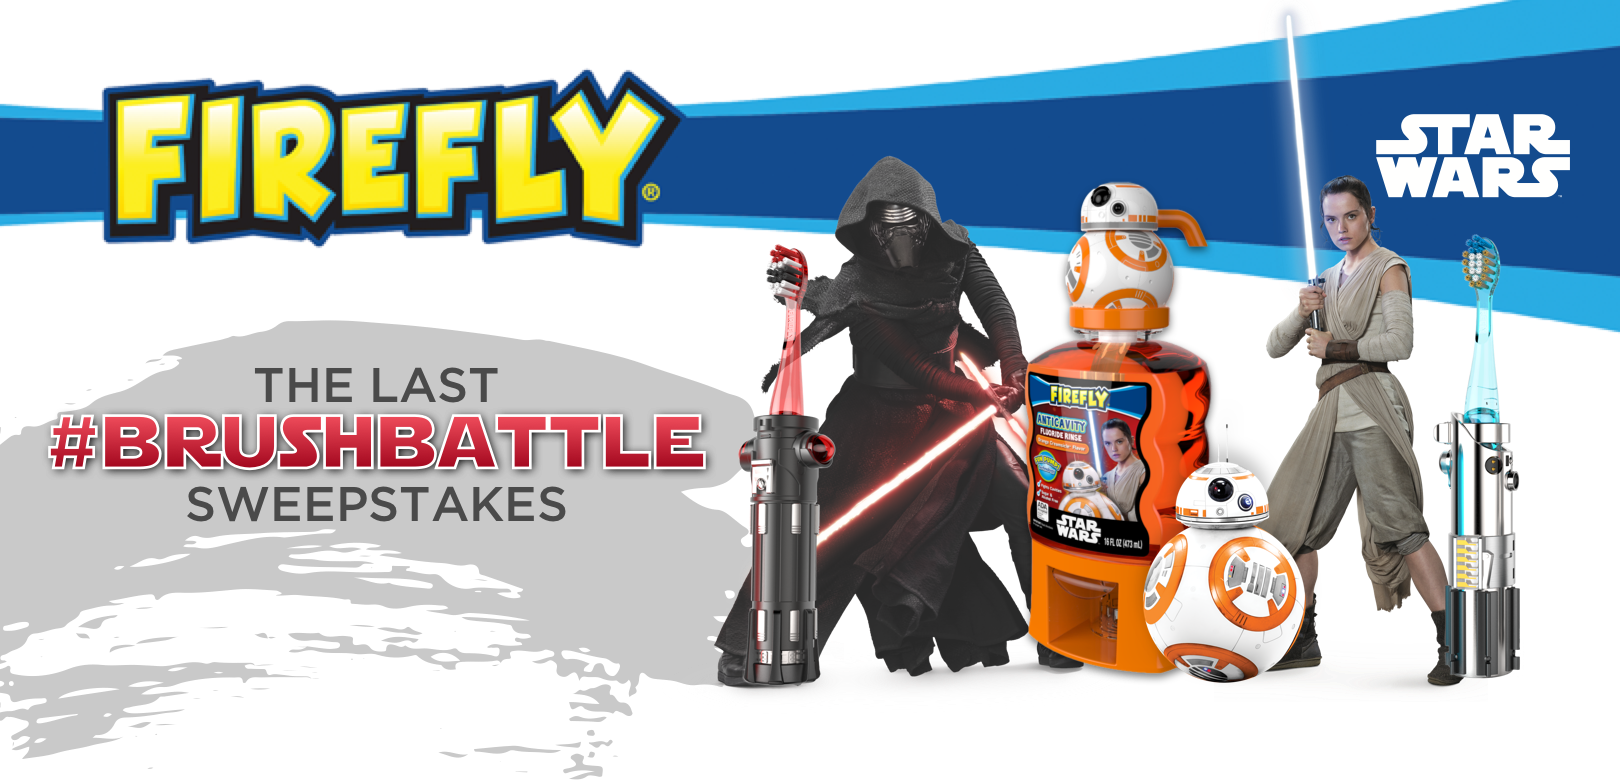 Enter the Firefly: The Last #BrushBattle Sweepstakes daily through February 23 for a chance to win a Star Wars prize package including a latest generation gaming system! Take hold of Star Wars excitement and win the daily #BrushBattle with favorite characters from the latest films. Defeat cavities with Firefly's Kylo Ren and Rey lightsaber toothbrushes, then rinse away bacteria with the BB-8 Anti-Cavity Fun Pump rinse!